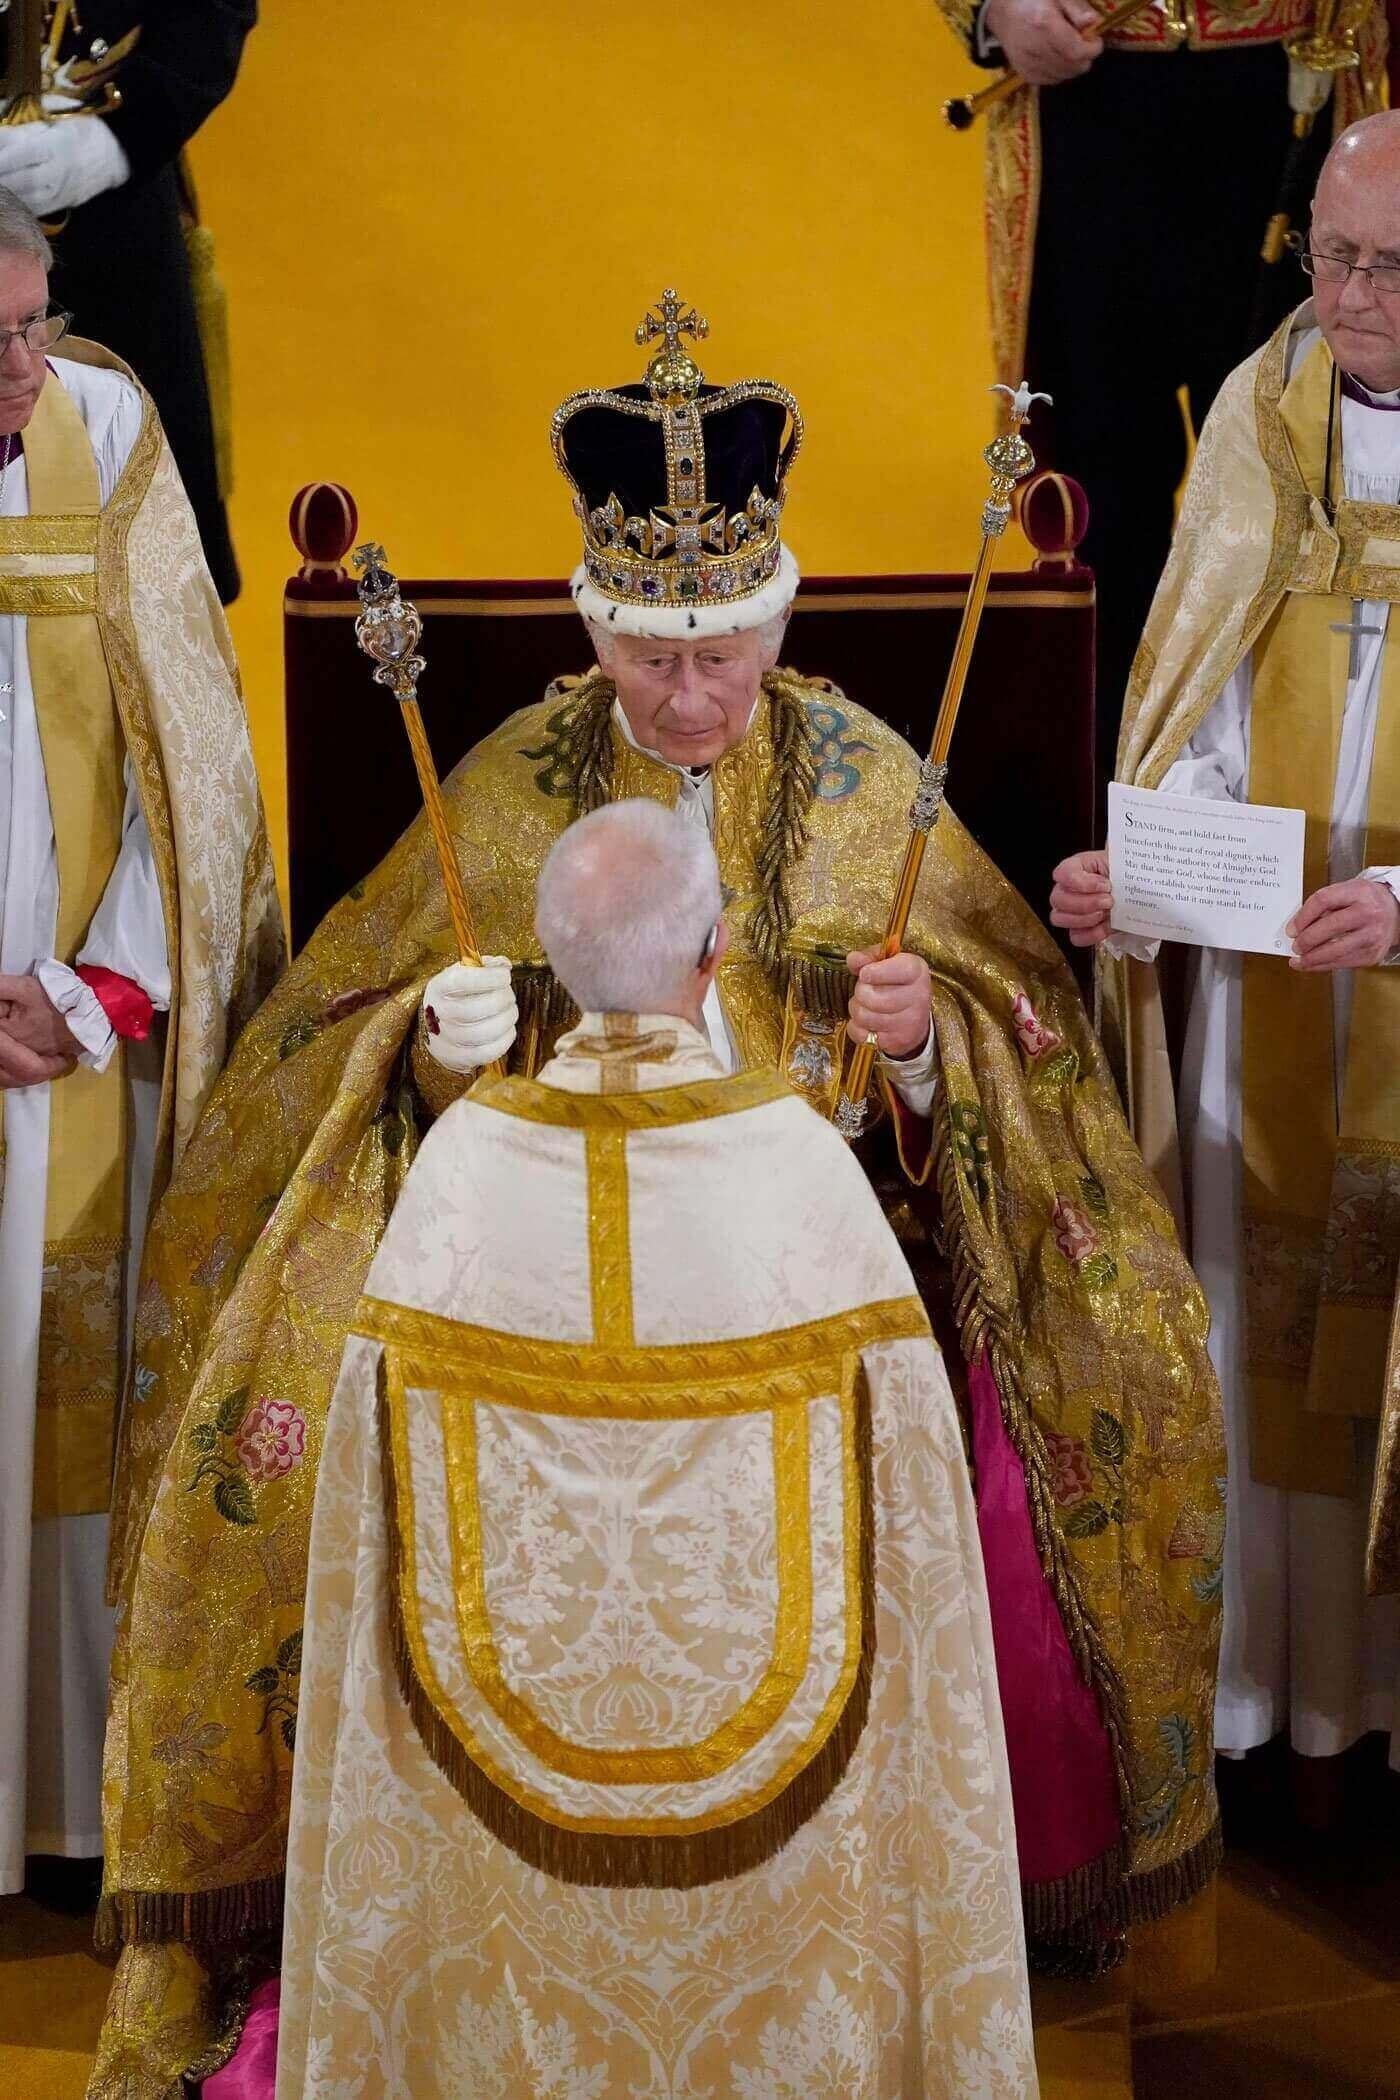 King Charles III wearing the St Edward's Crown